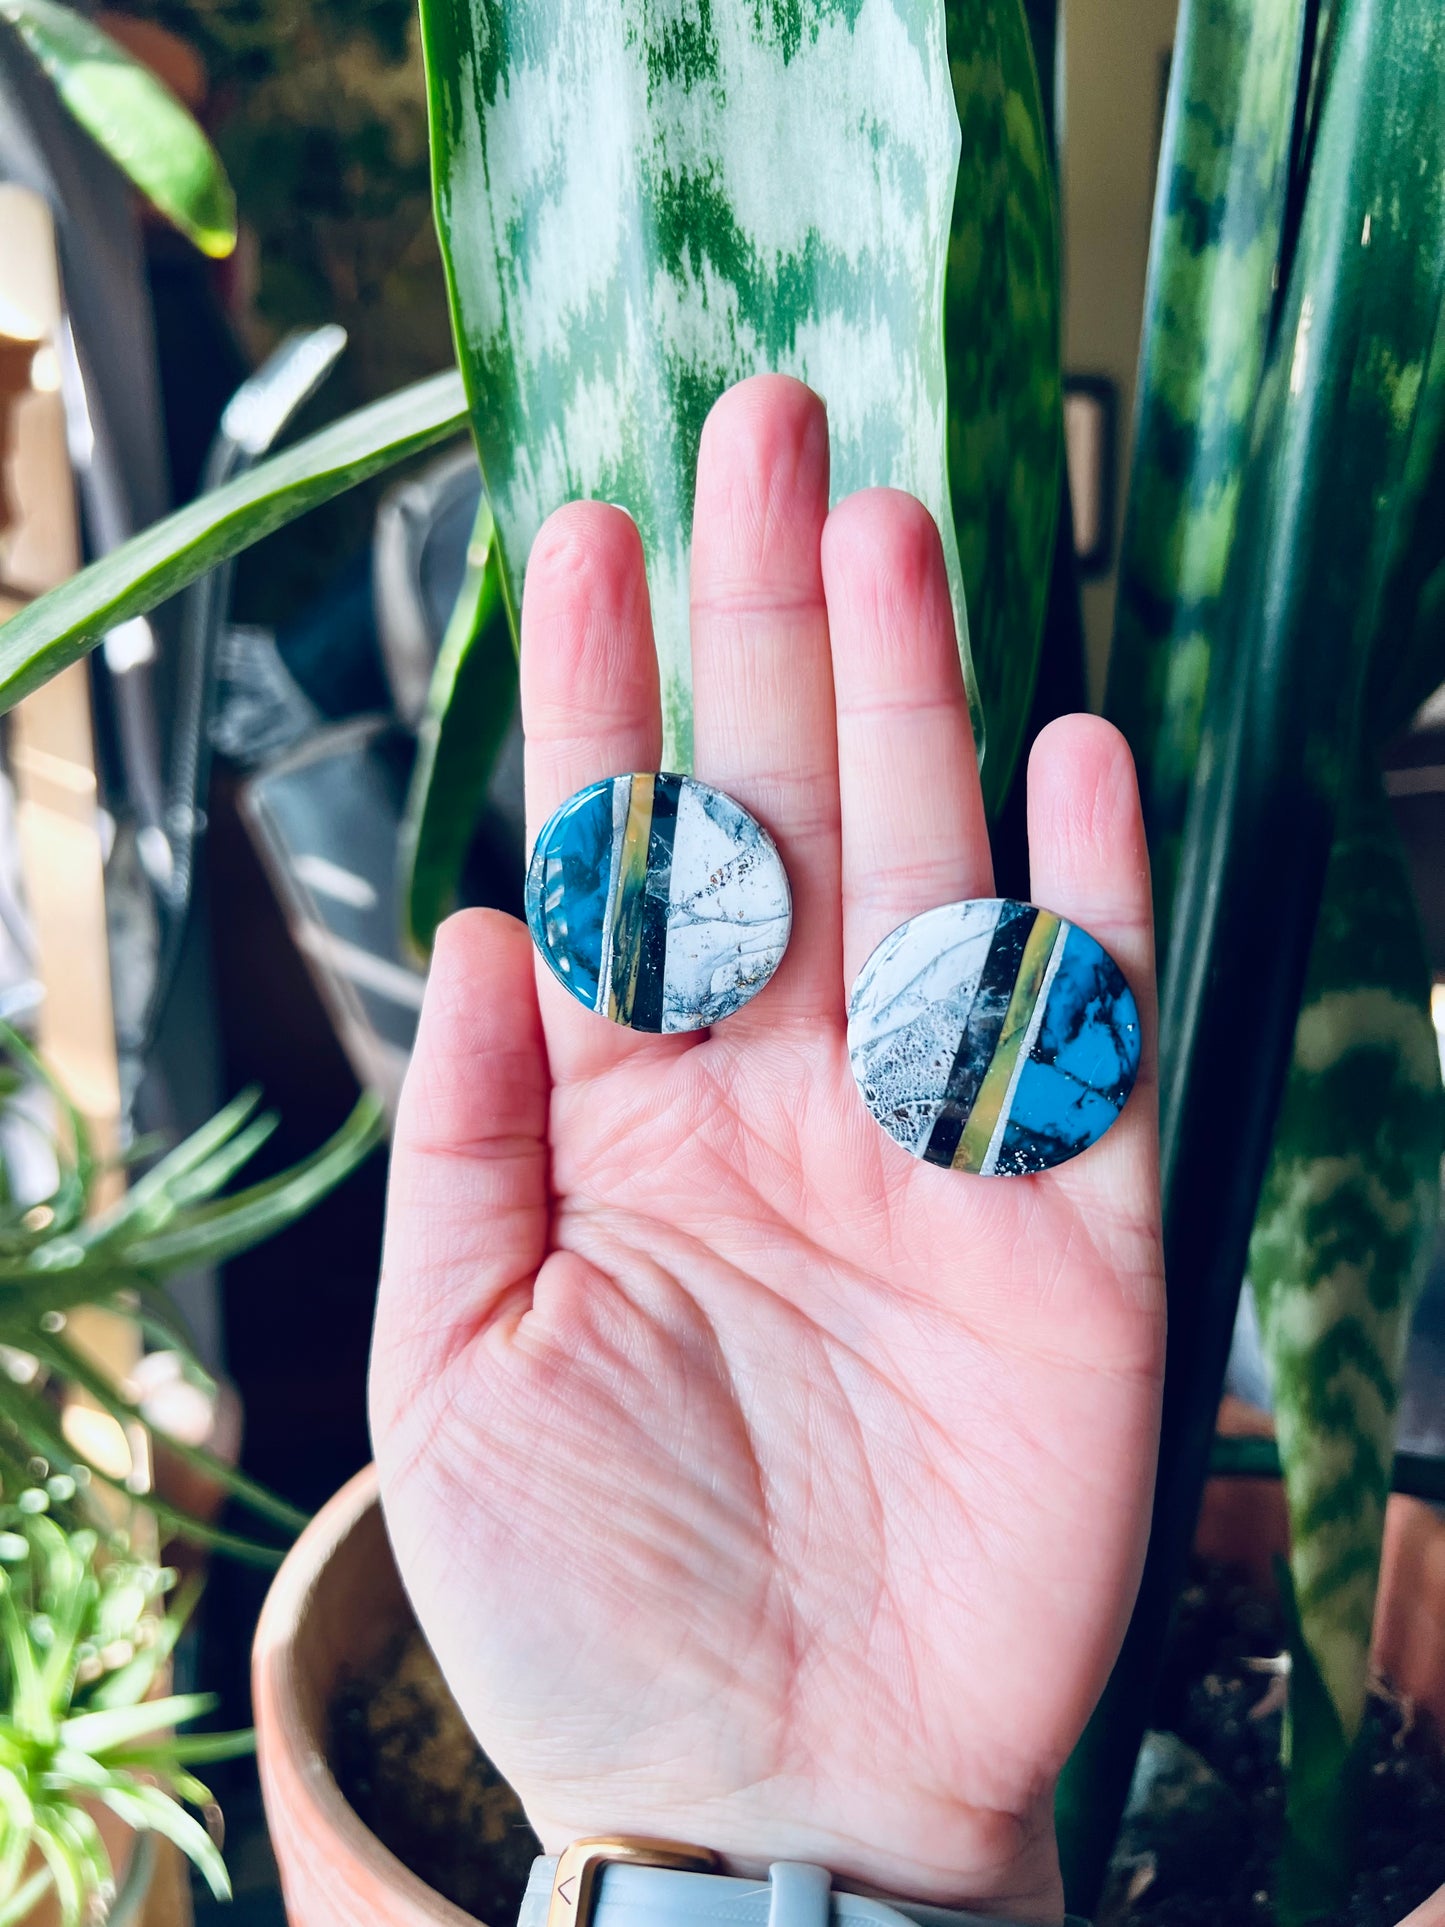 Round earring studs that are handcrafted from polymer clay. Featuring faux marble and turquoise designs, inspired by the rustic elegance of the Southwest. Channeling the region's symbolism of strength and connection to the earth.